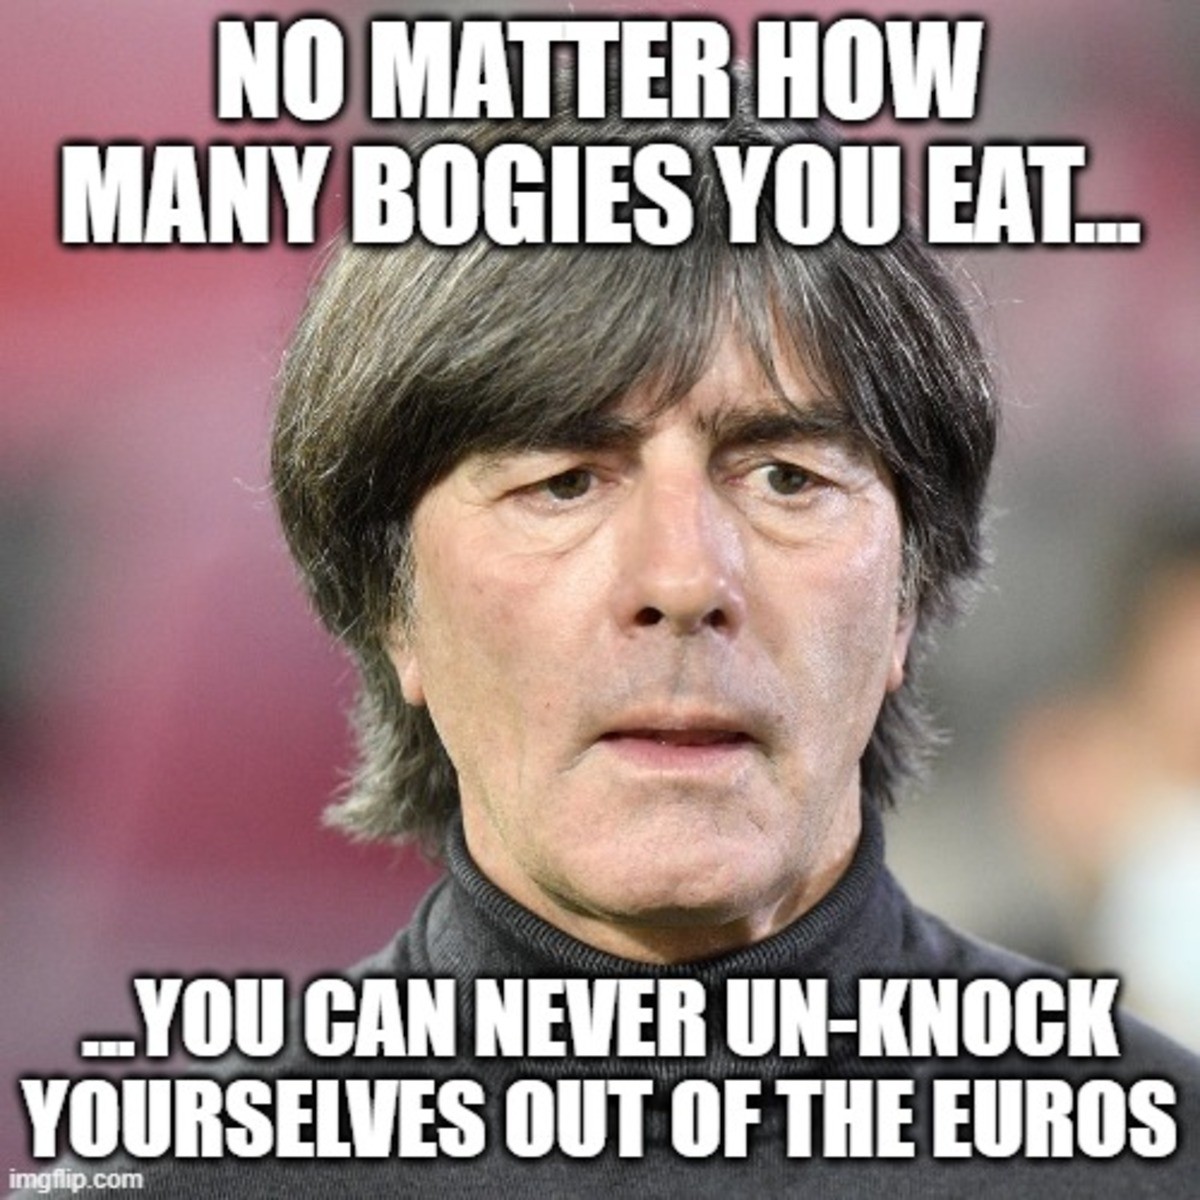 It's Still Coming Home!. .. Thanks Ingerland for ending Löw. Finally we can be free.